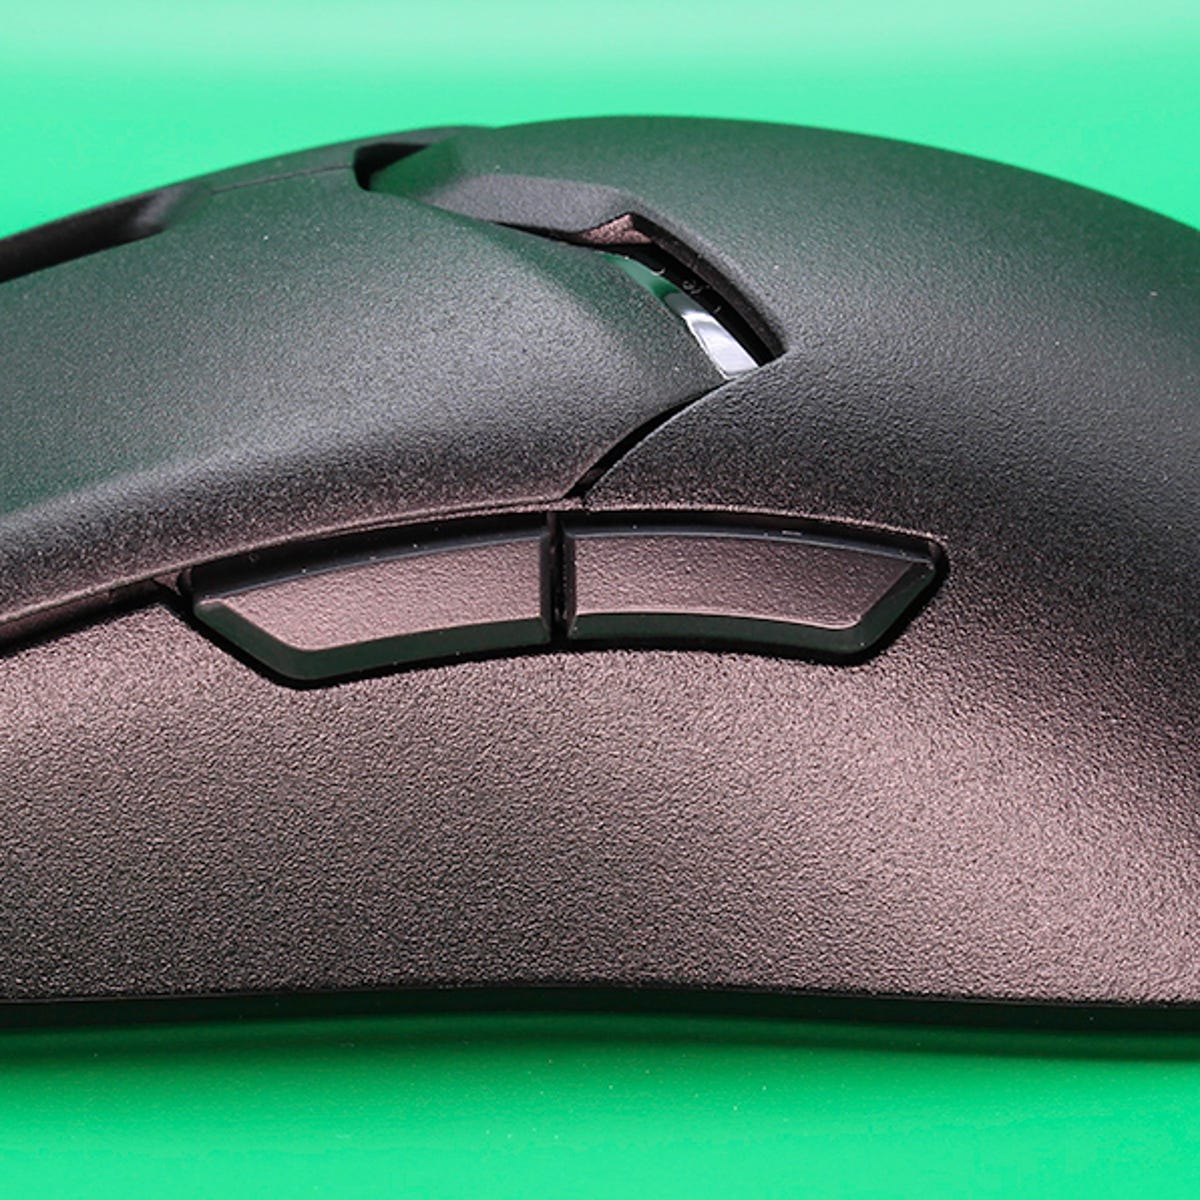 Razer V2 Pro review: Why is this mouse controversial? |